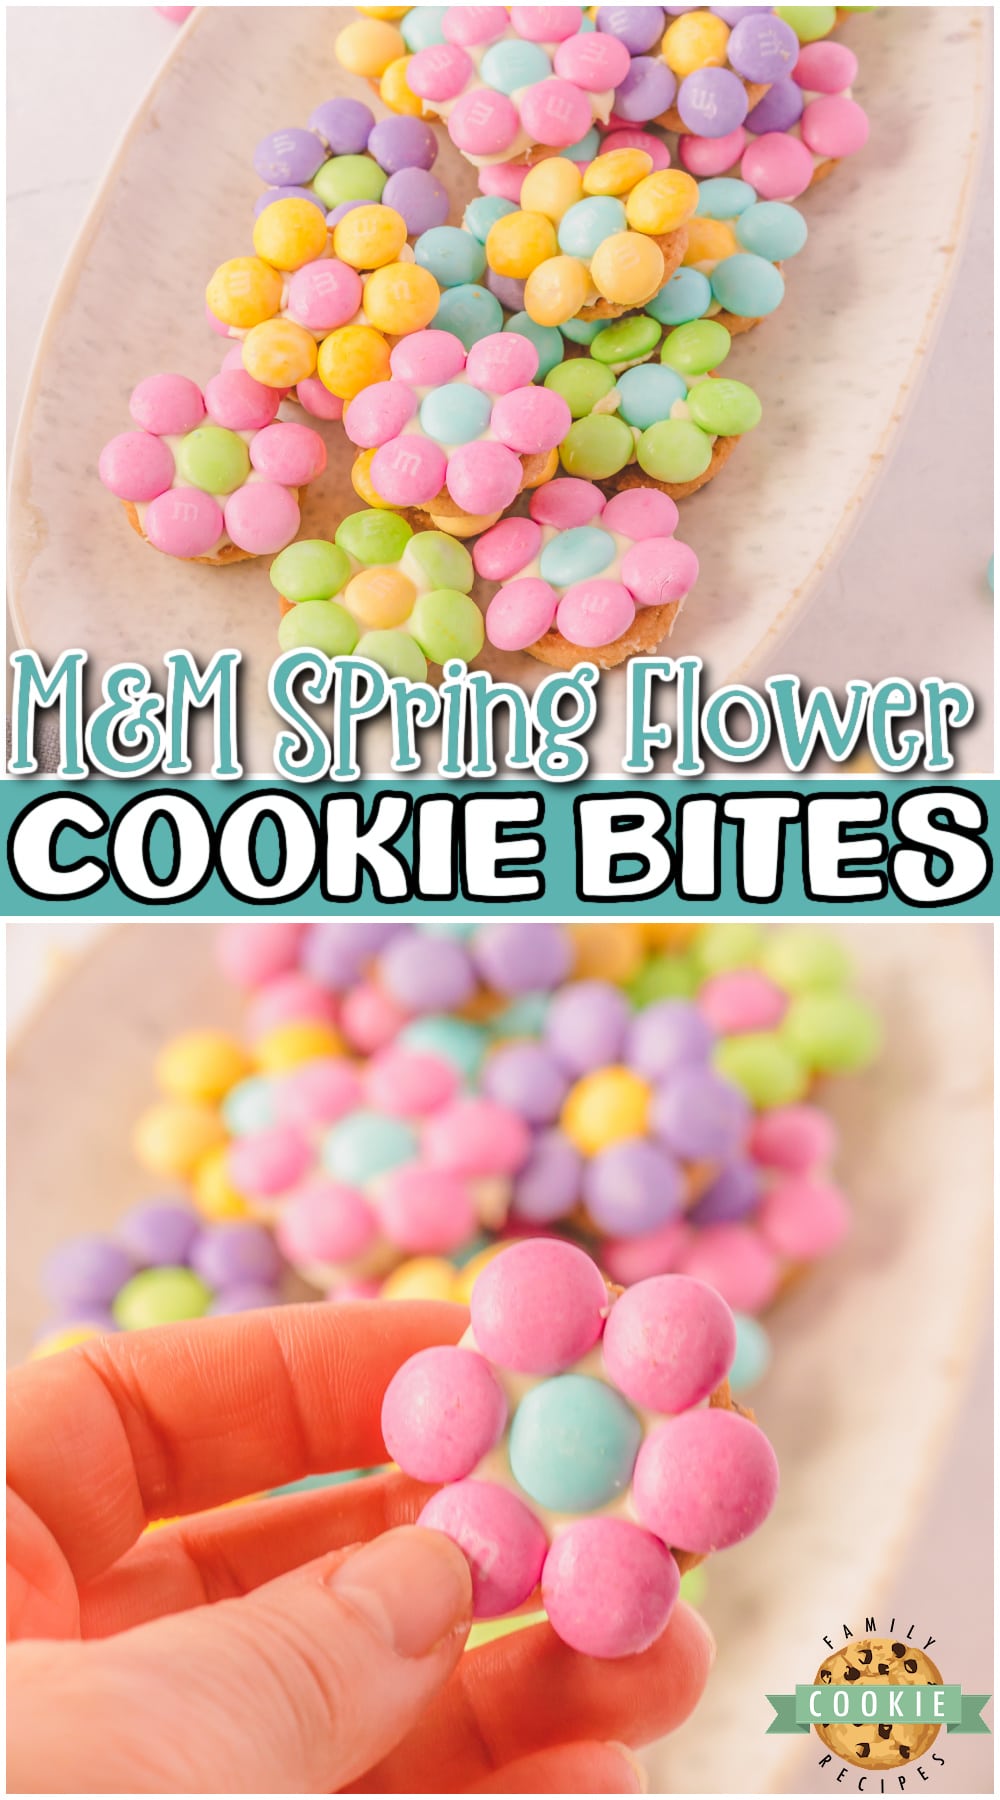 M&M Spring Flower Cookie Bites are simple & fun pastel candy treats! Made to look adorable and taste delicious, these M&M cookies are a perfect treat for Spring.